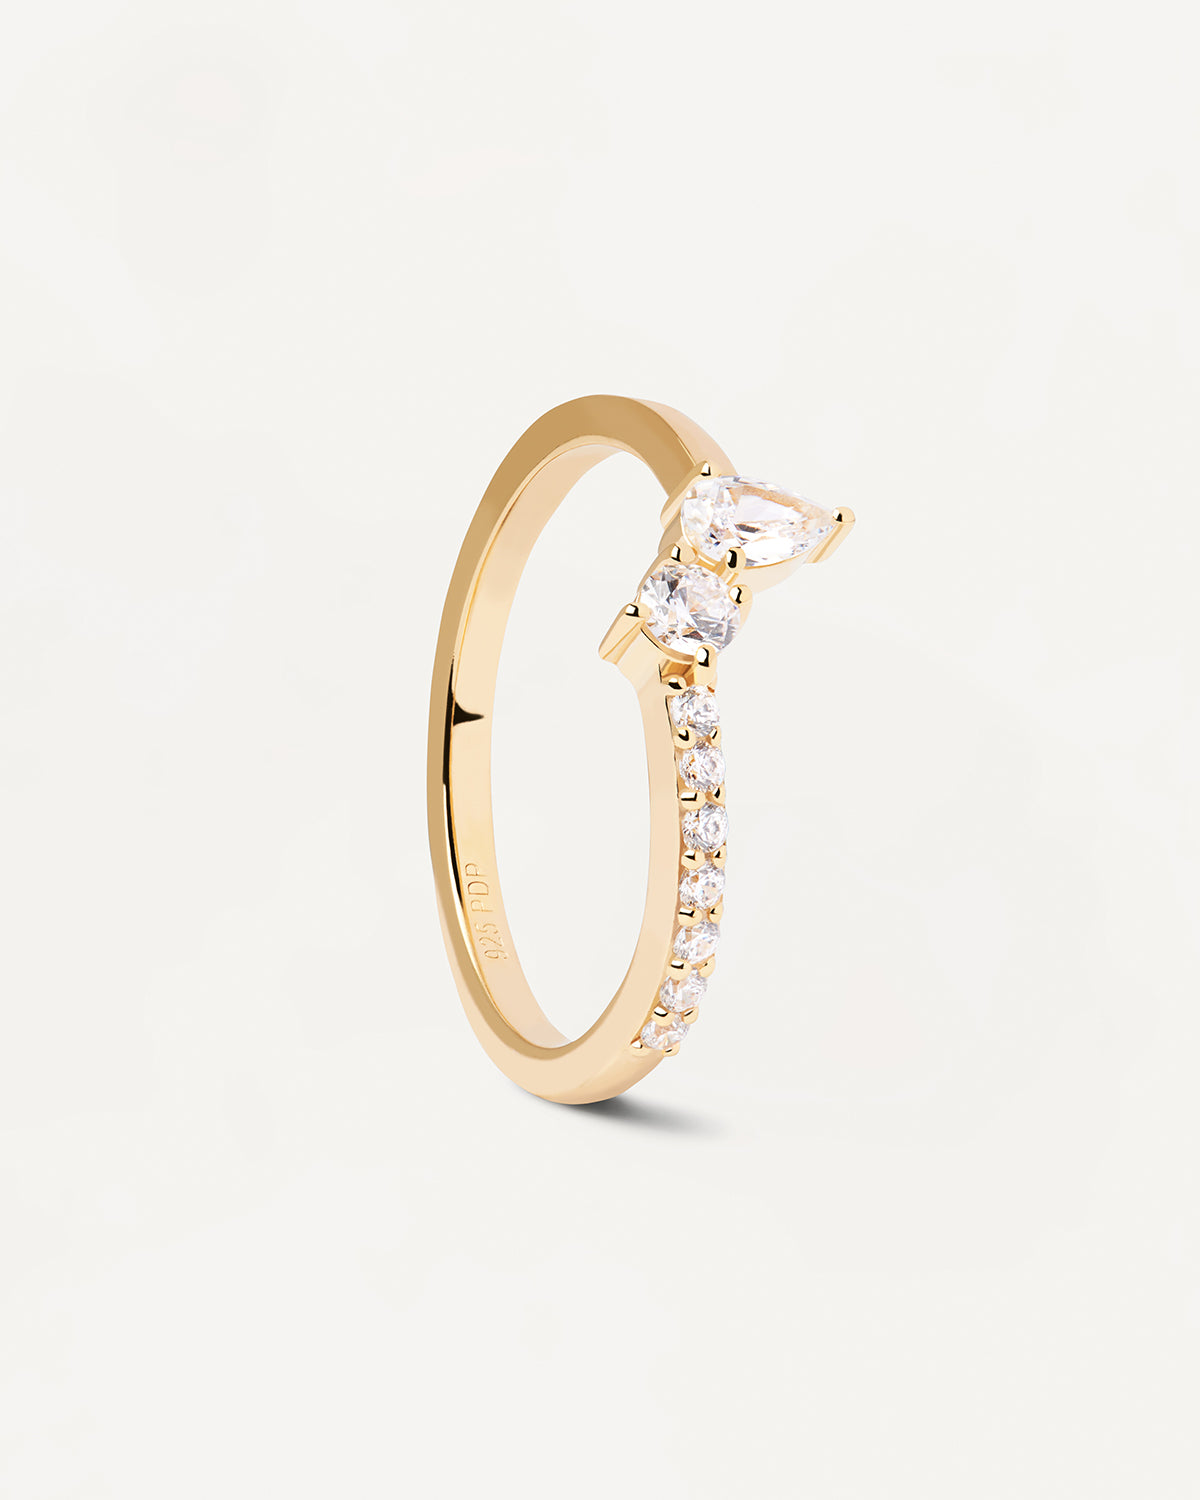 2023 Selection | Ava Ring. Gold-plated sterling silver ring with white crystals in different sizes. Get the latest arrival from PDPAOLA. Place your order safely and get this Best Seller. Free Shipping.